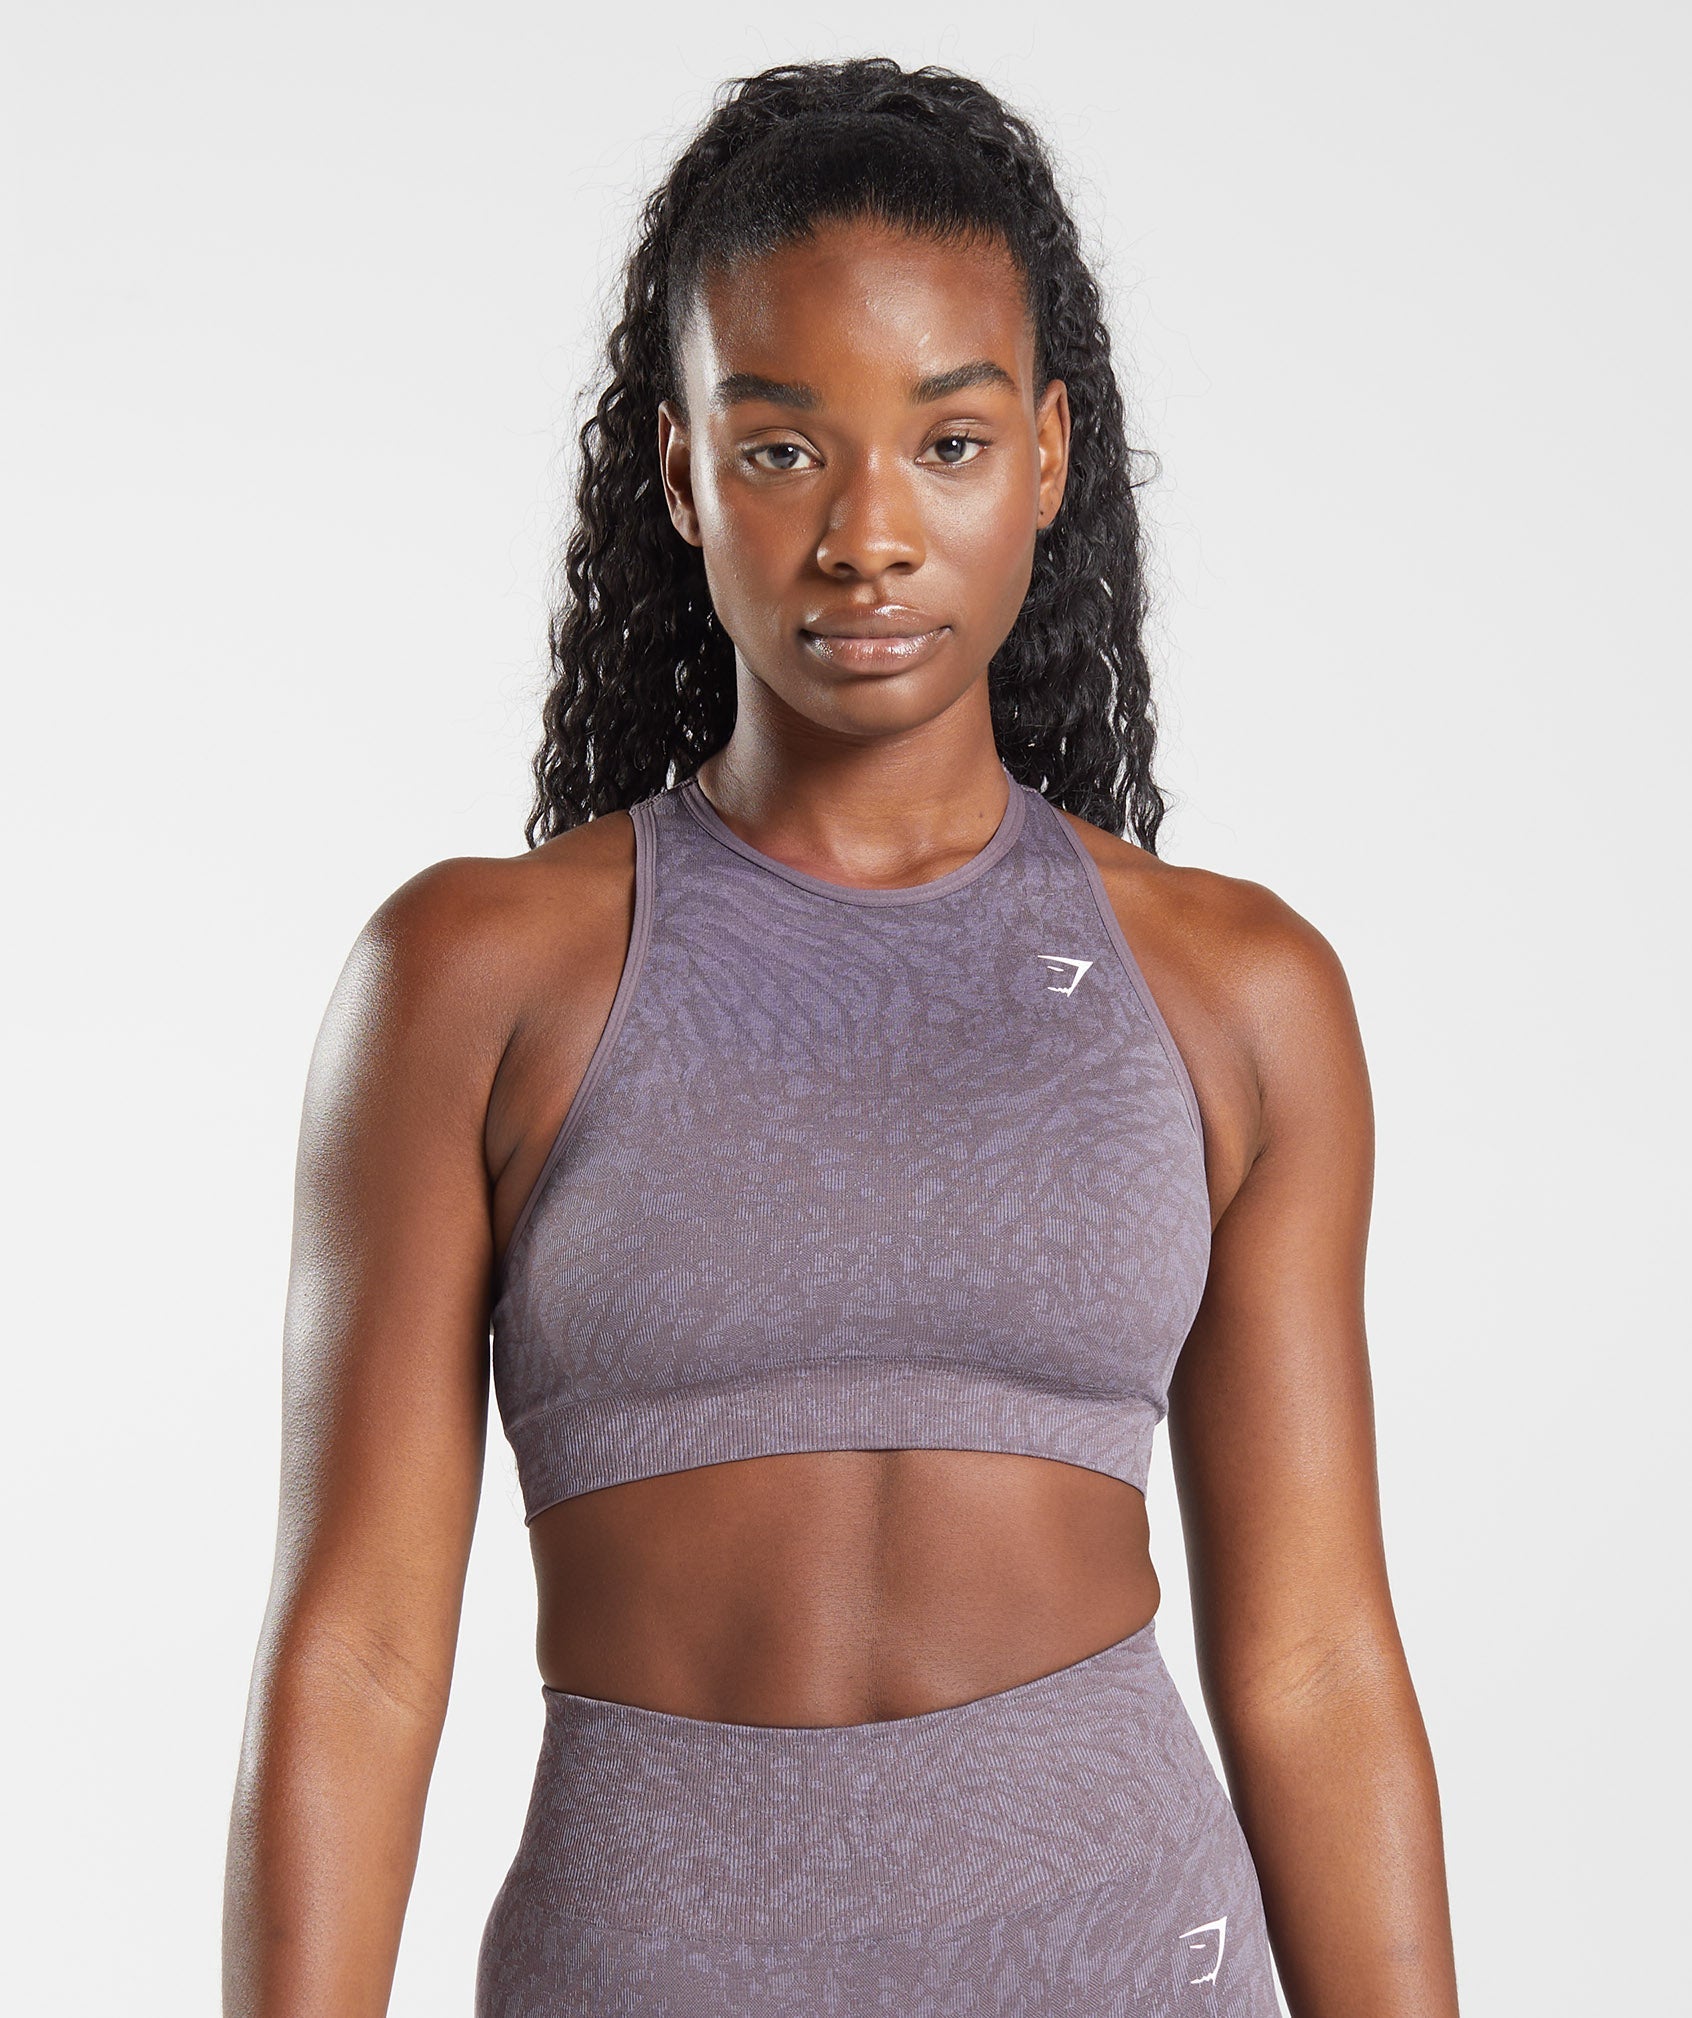 BAYDI Sports Bra Removable Padded Crop Tops High Neck Tank Tops